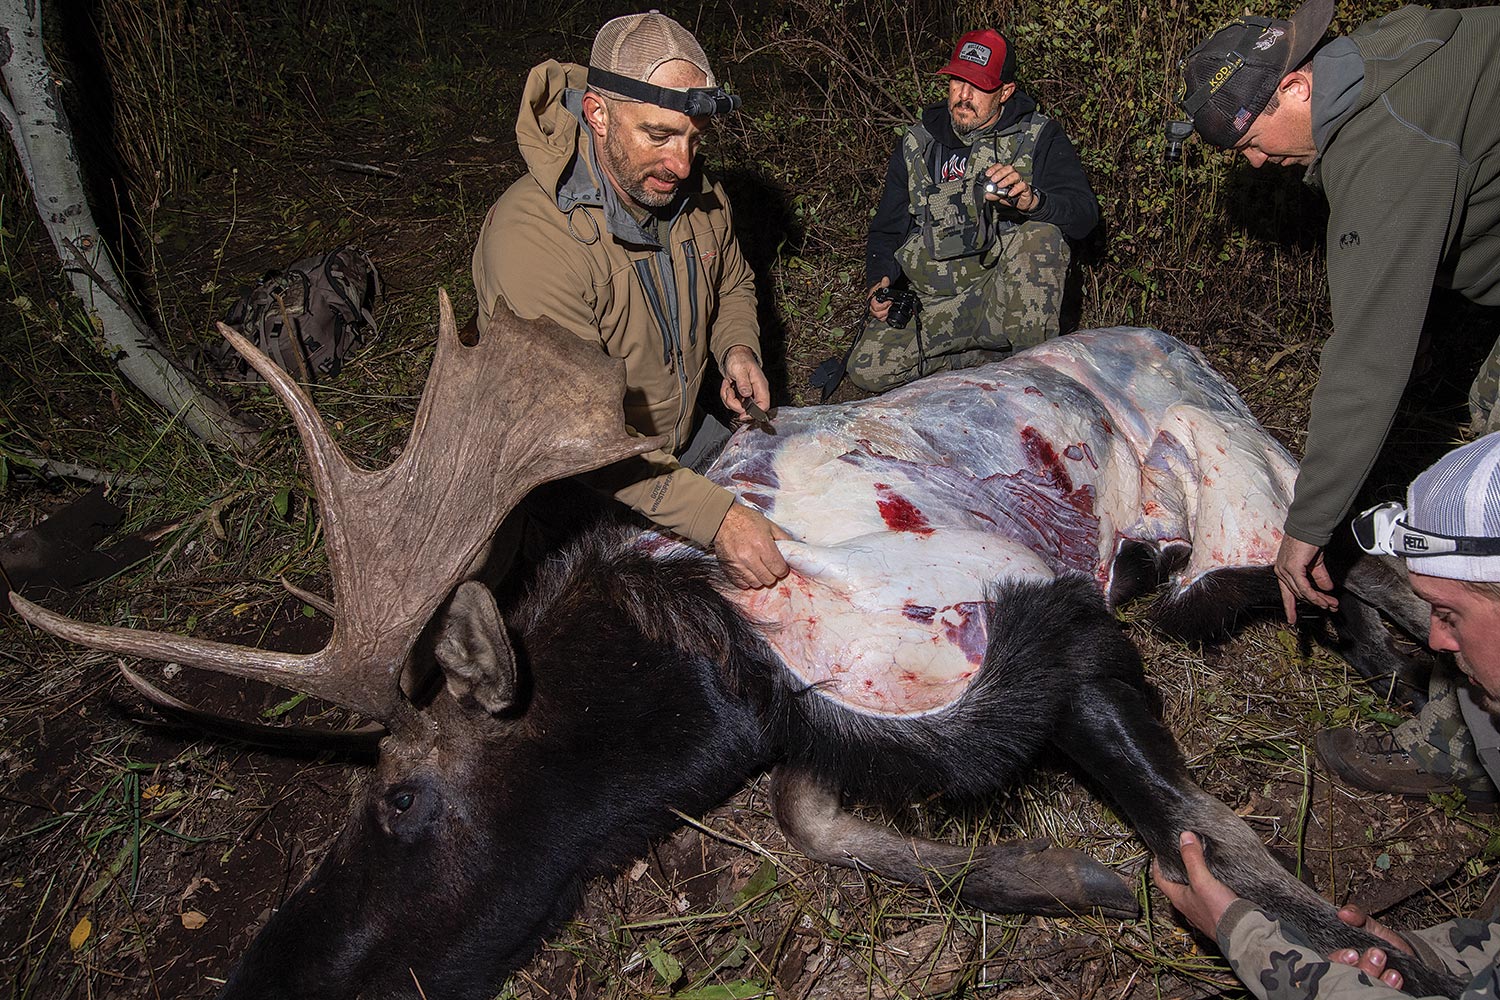 Four hunters skin moose in darkness using headlamps for light.